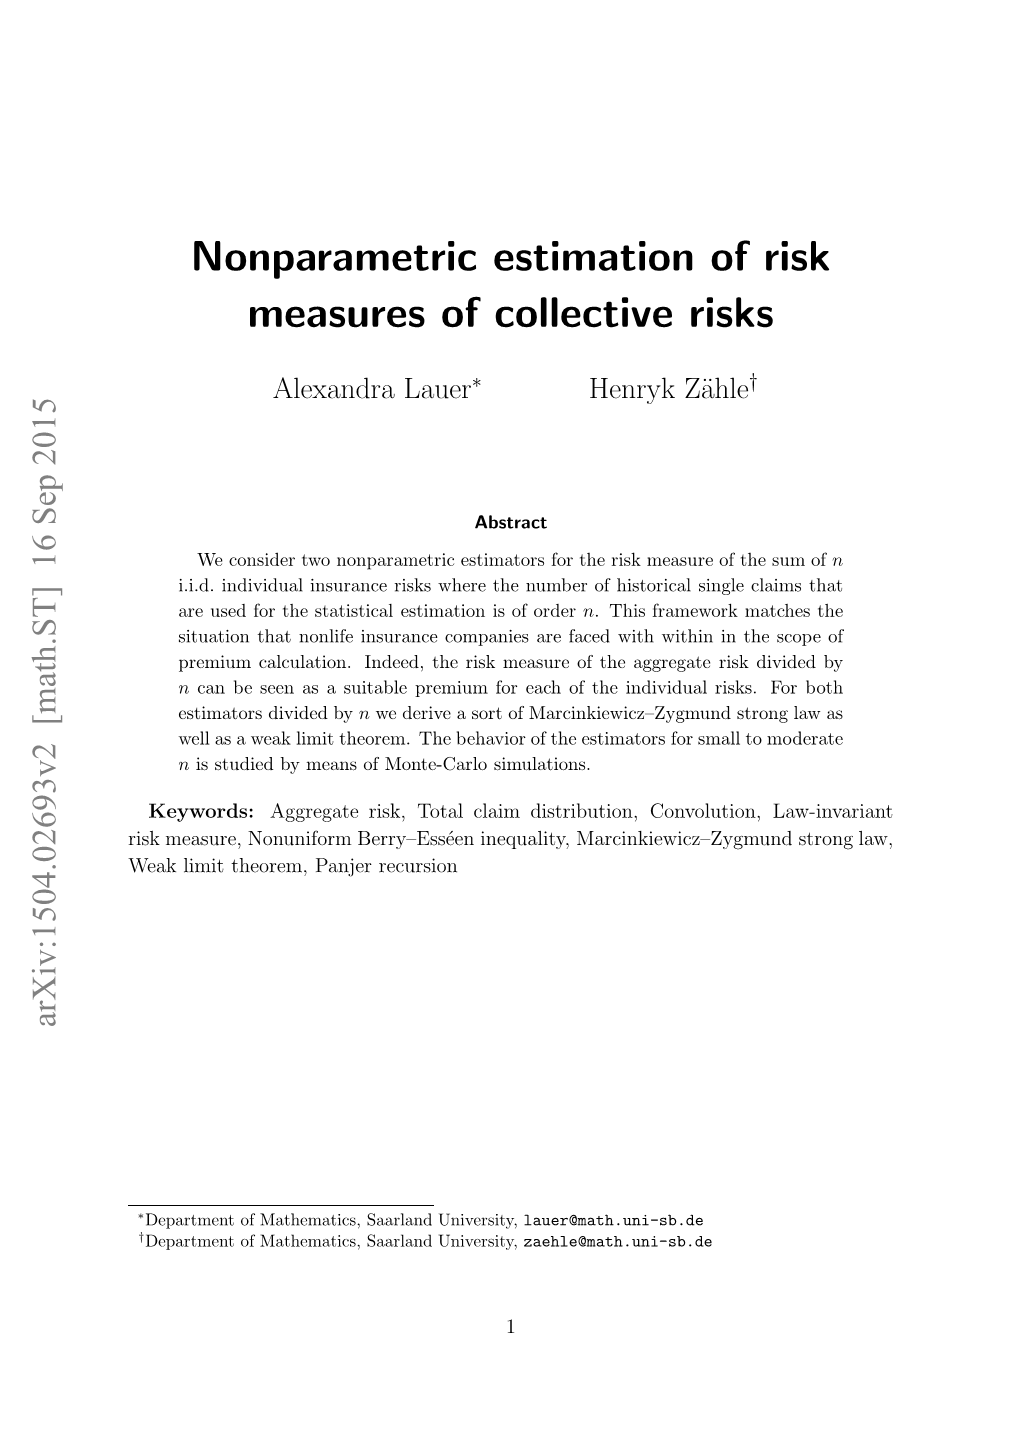 Nonparametric Estimation of Risk Measures of Collective Risks